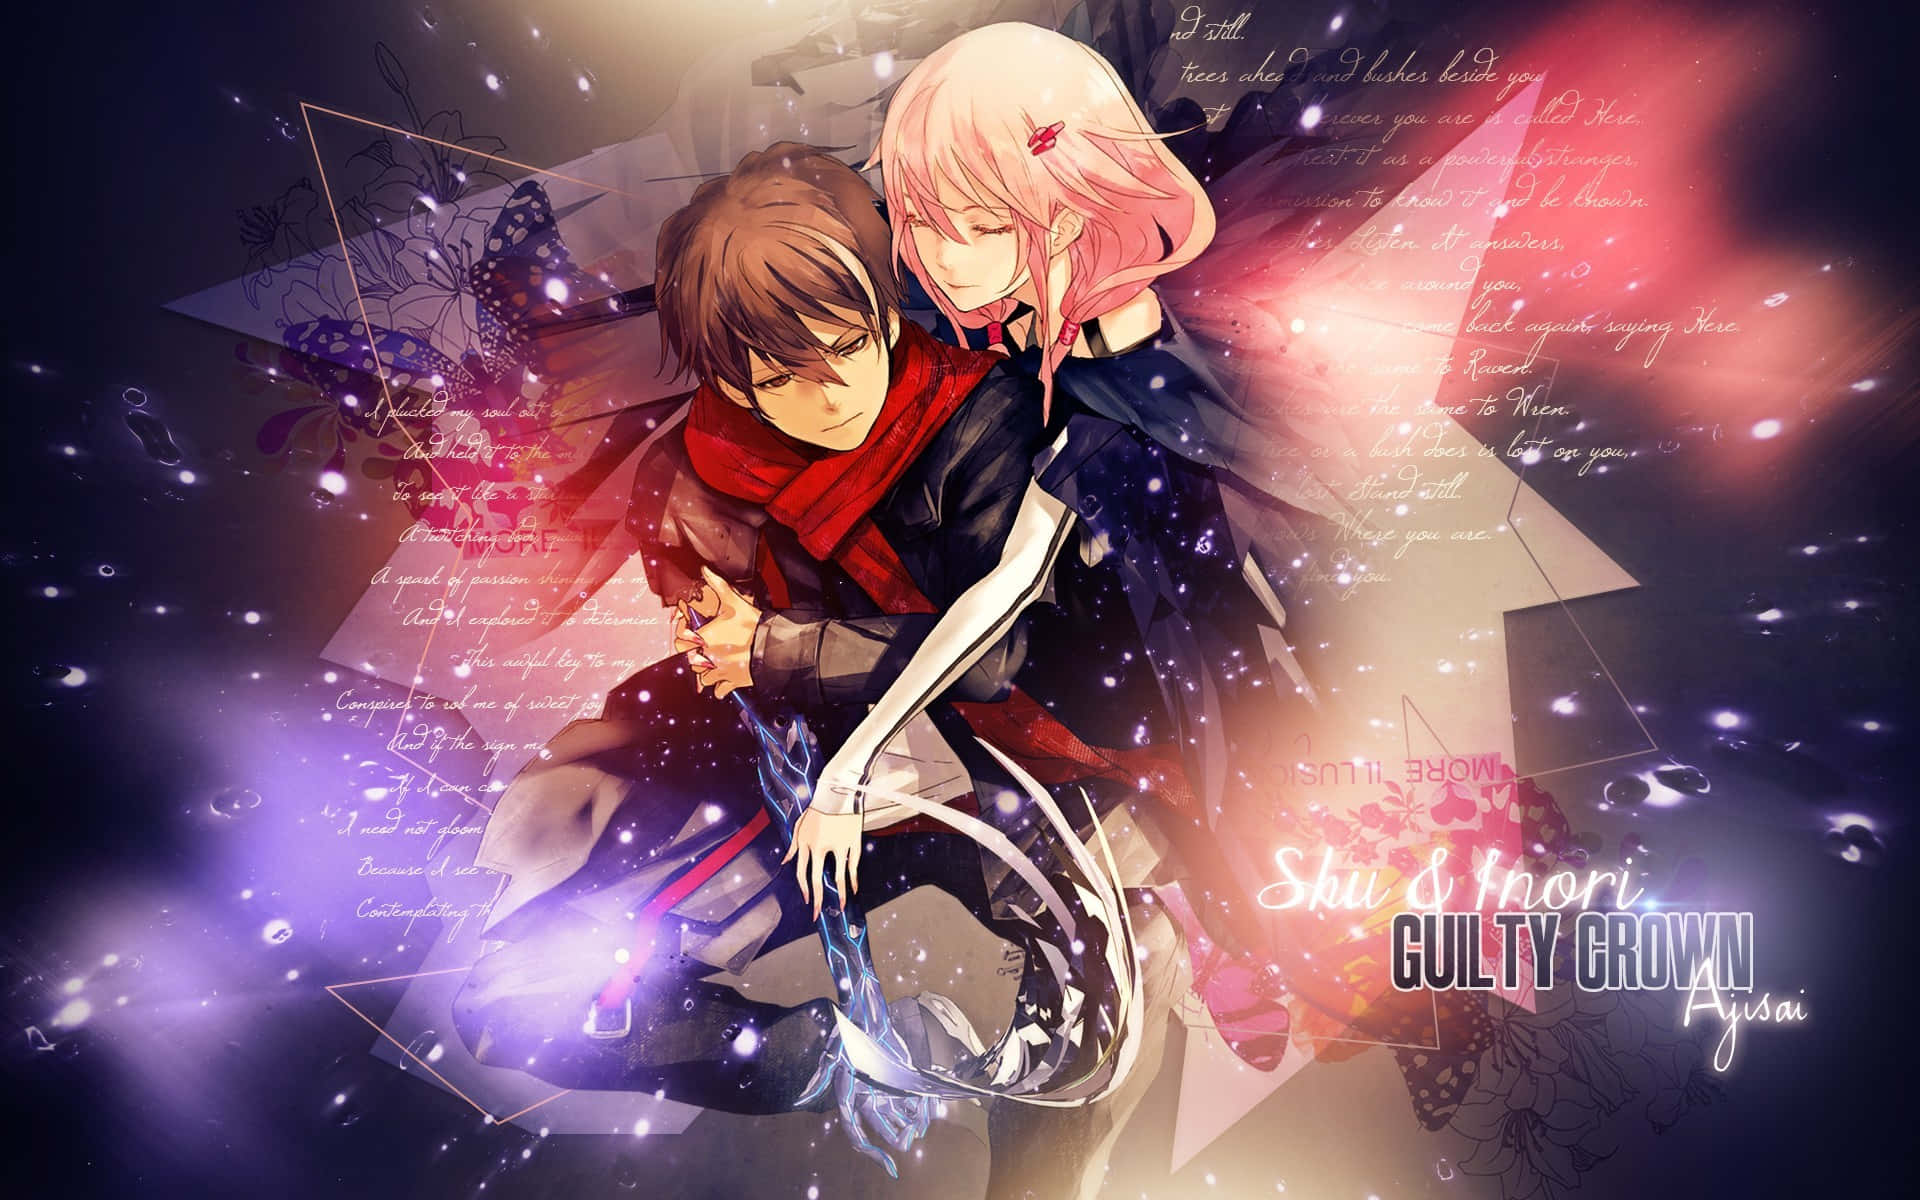 In the post-Apocalyptic world of Guilty Crown, Shu Ouma must confront the mysterious power of Kings to save the world.